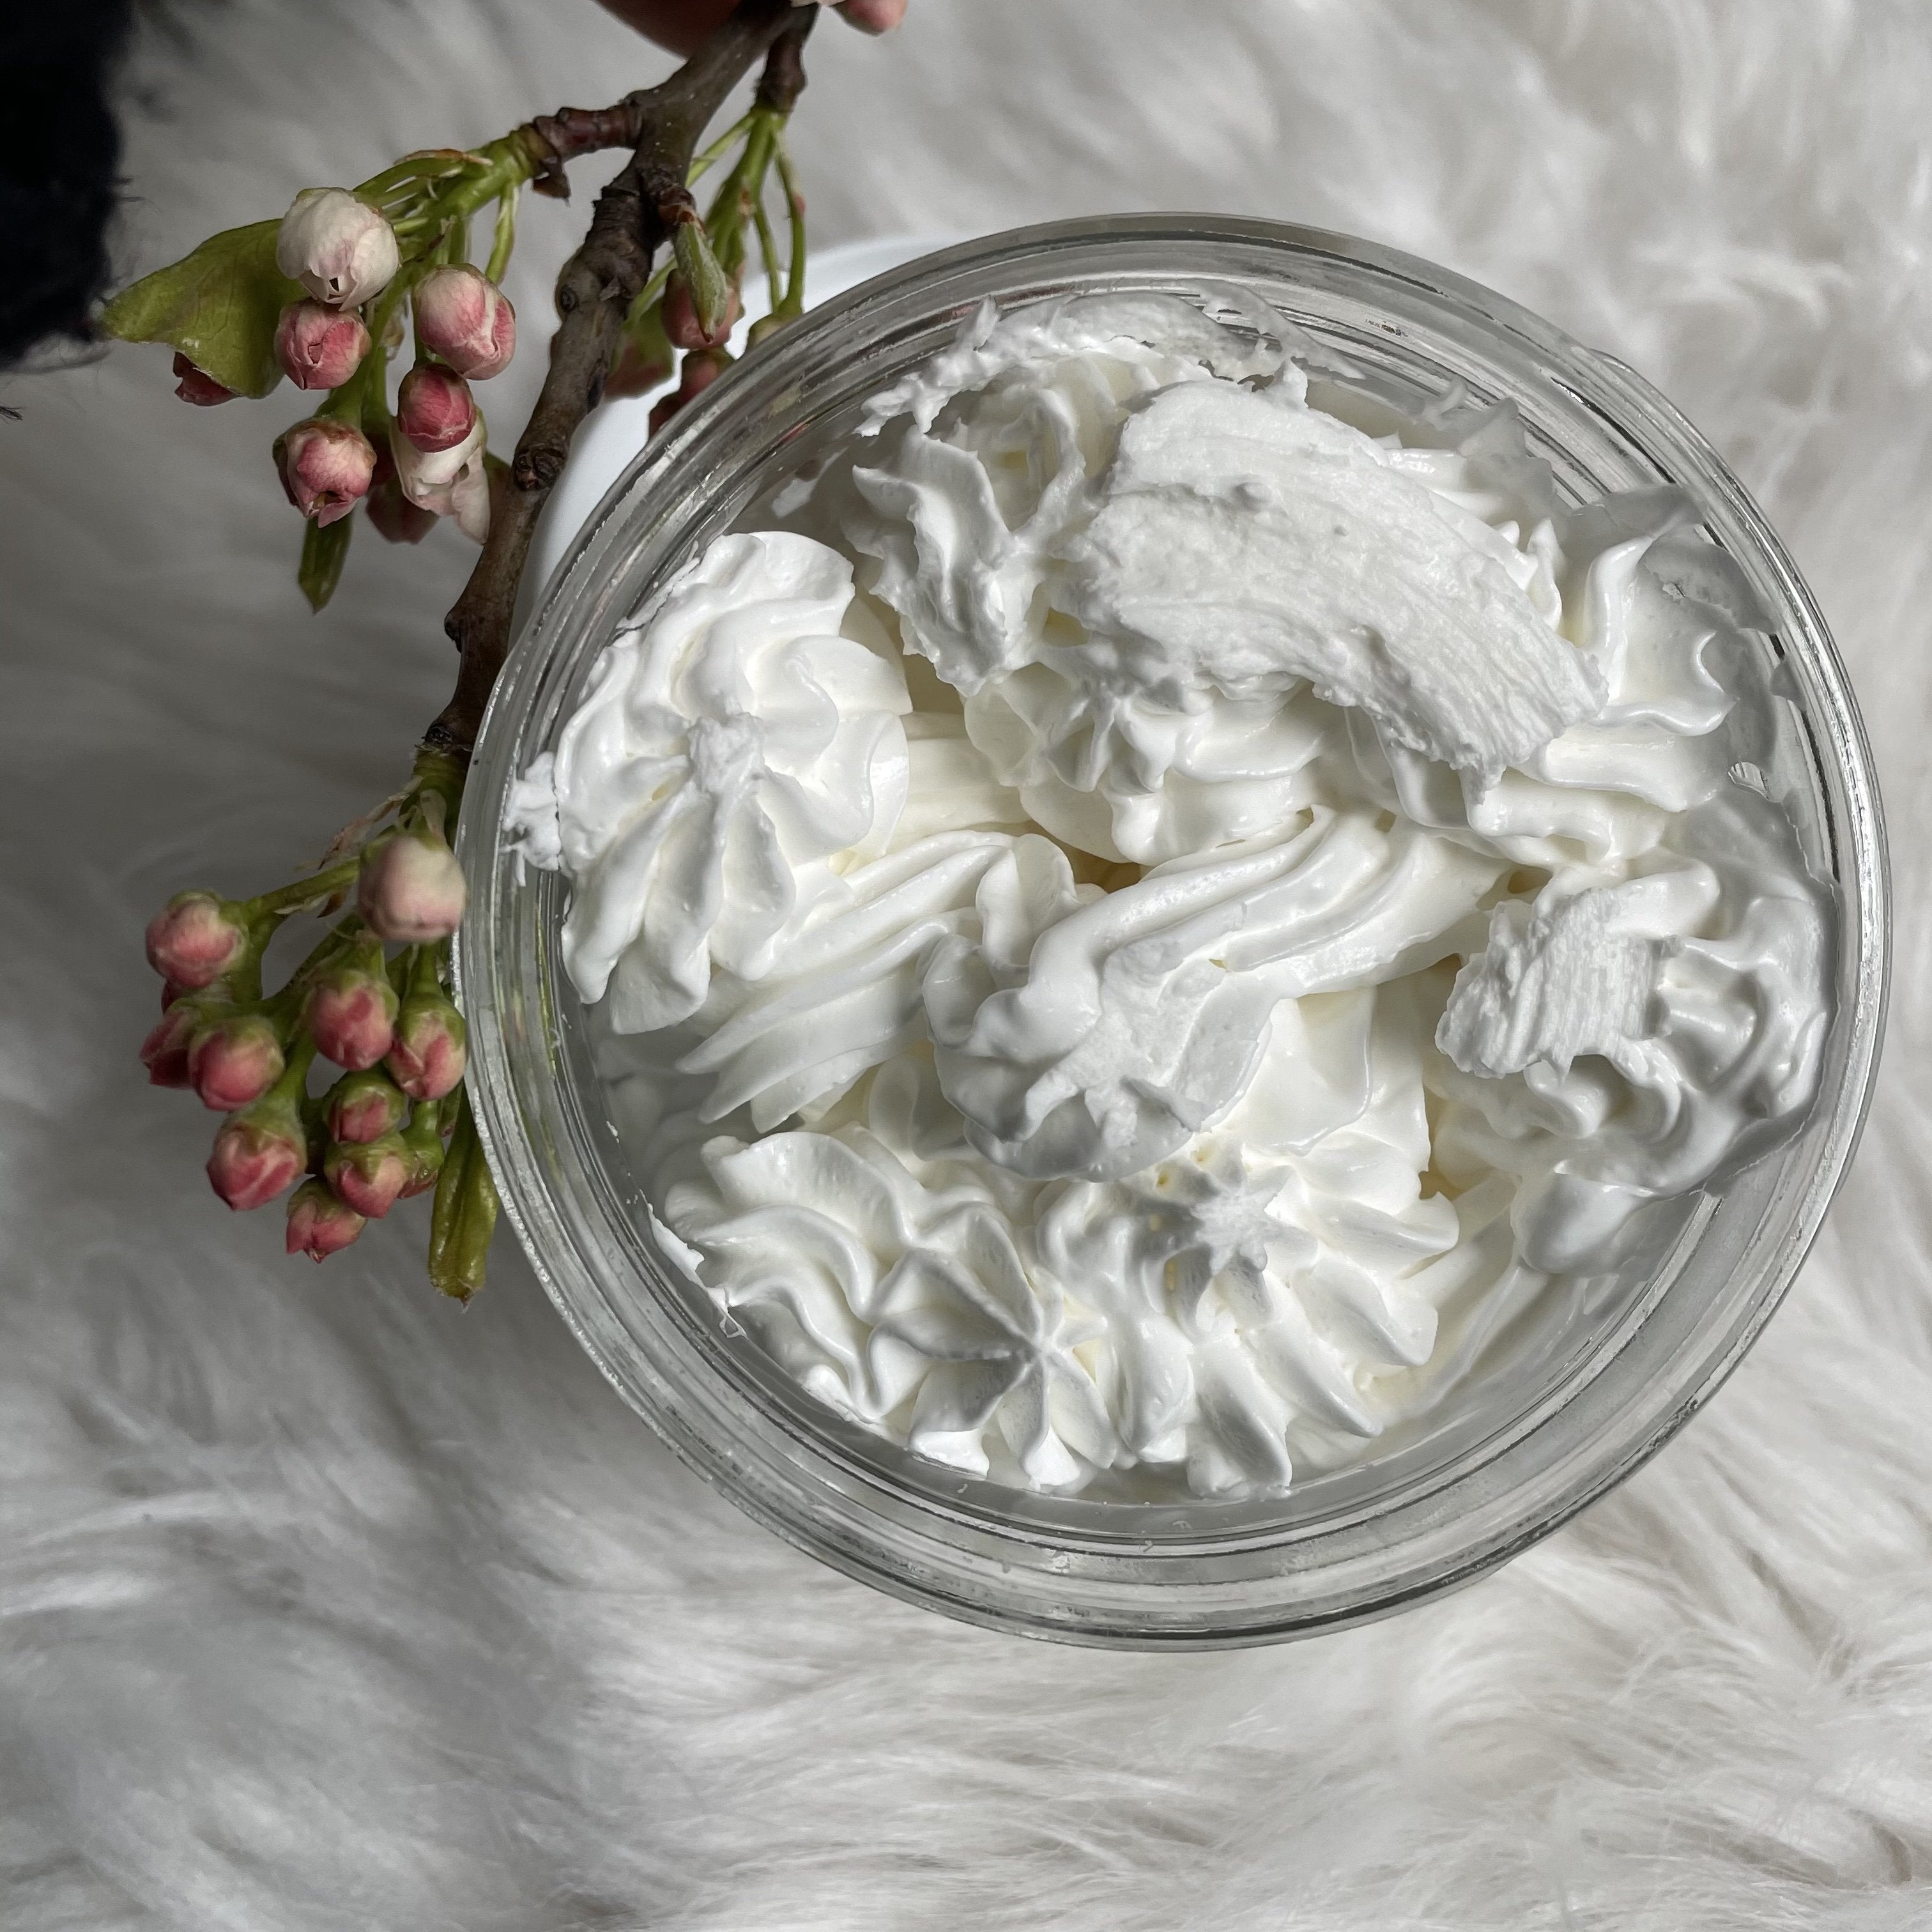  PURE & FRESH Naked Whipped Body Butter, 8 OZ : Beauty